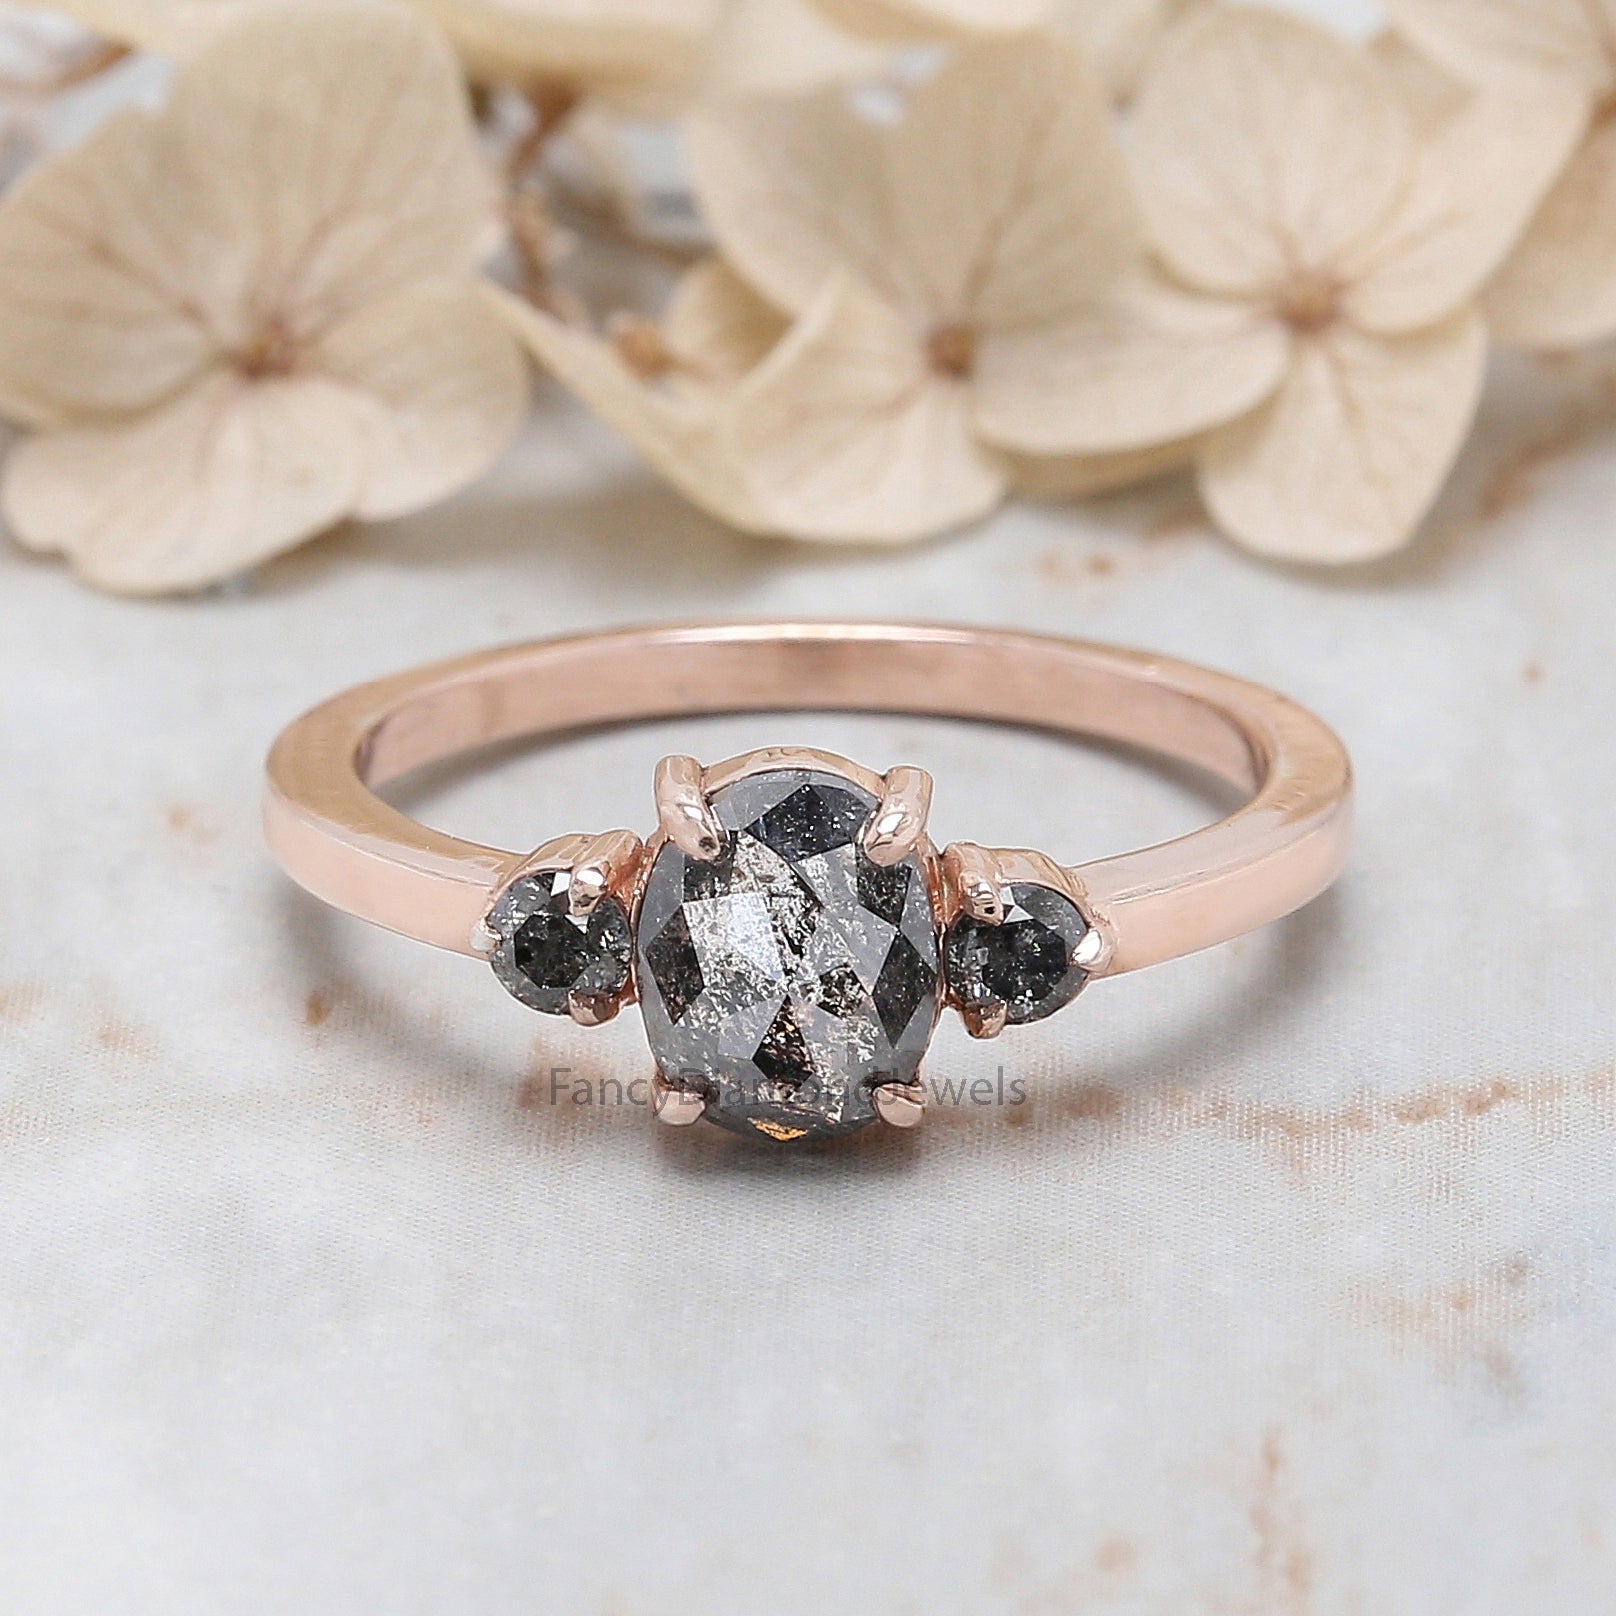 Oval Cut Salt And Pepper Diamond Ring 0.95 Ct 6.80 MM Oval Diamond Ring 14K Solid Rose Gold Silver Oval Engagement Ring Gift For Her QL1544